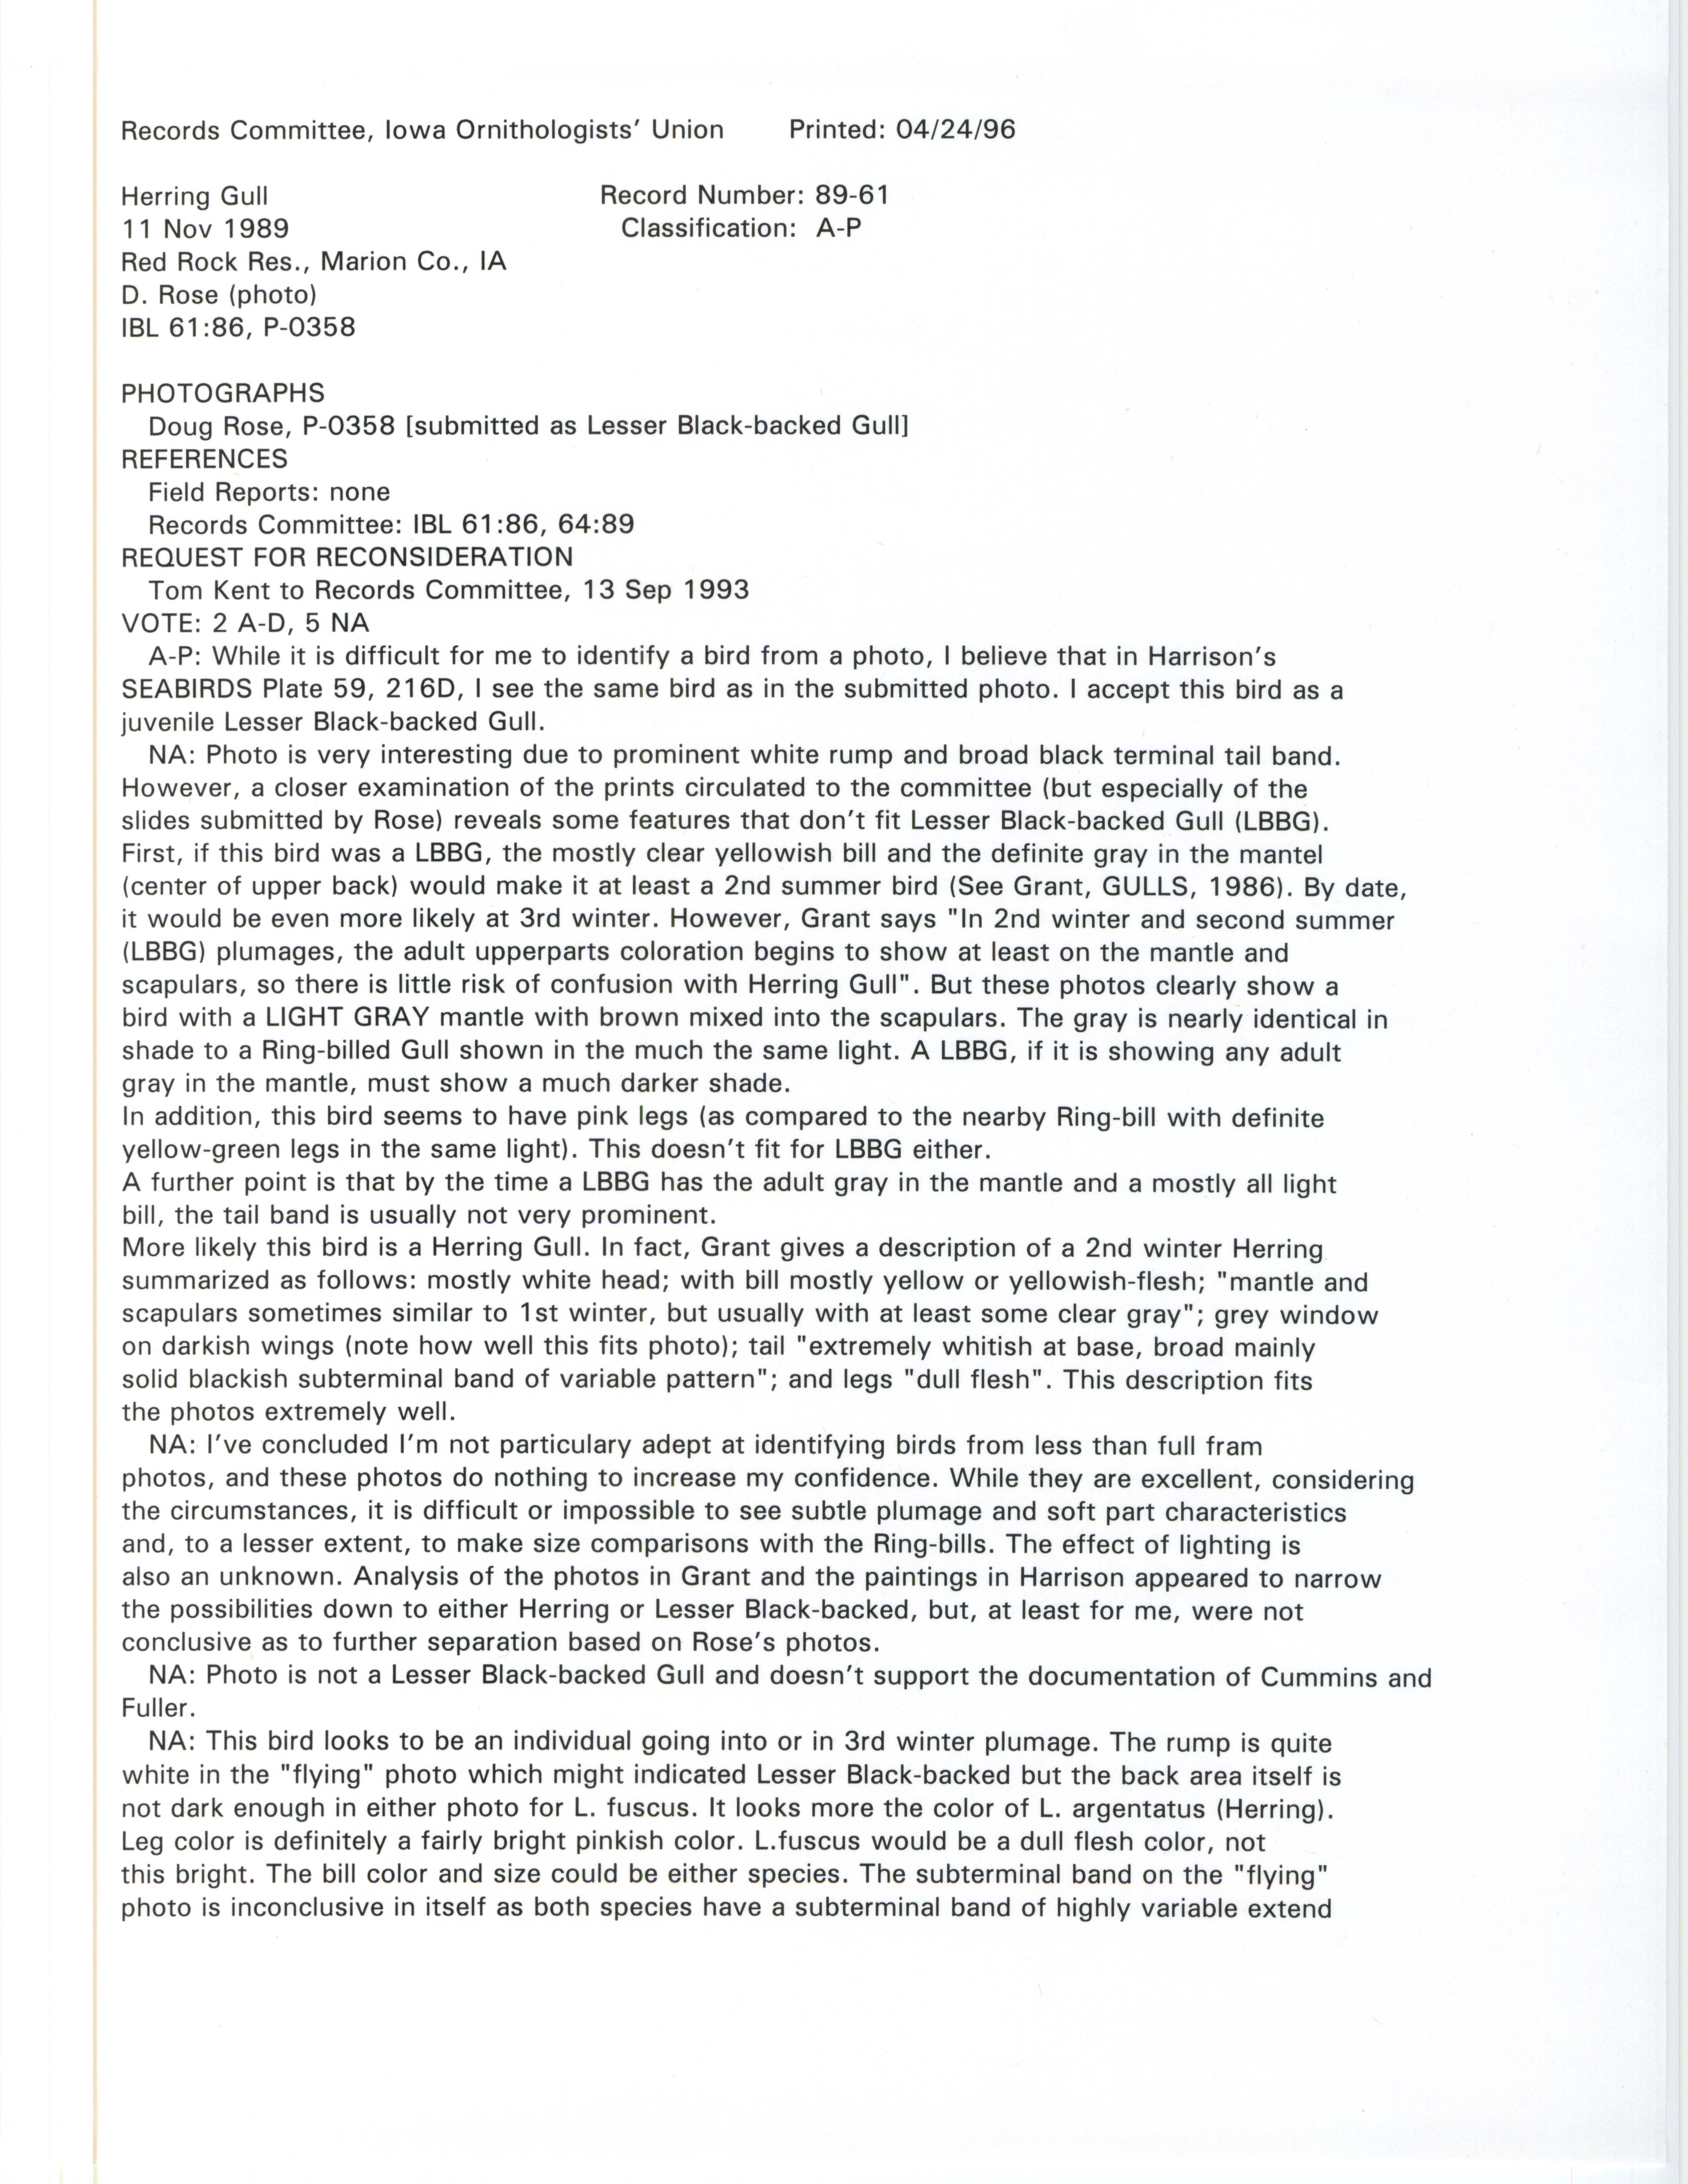 Records Committee review for rare bird sighting for Herring Gull at Red Rock Reservoir in Marion County in 1989